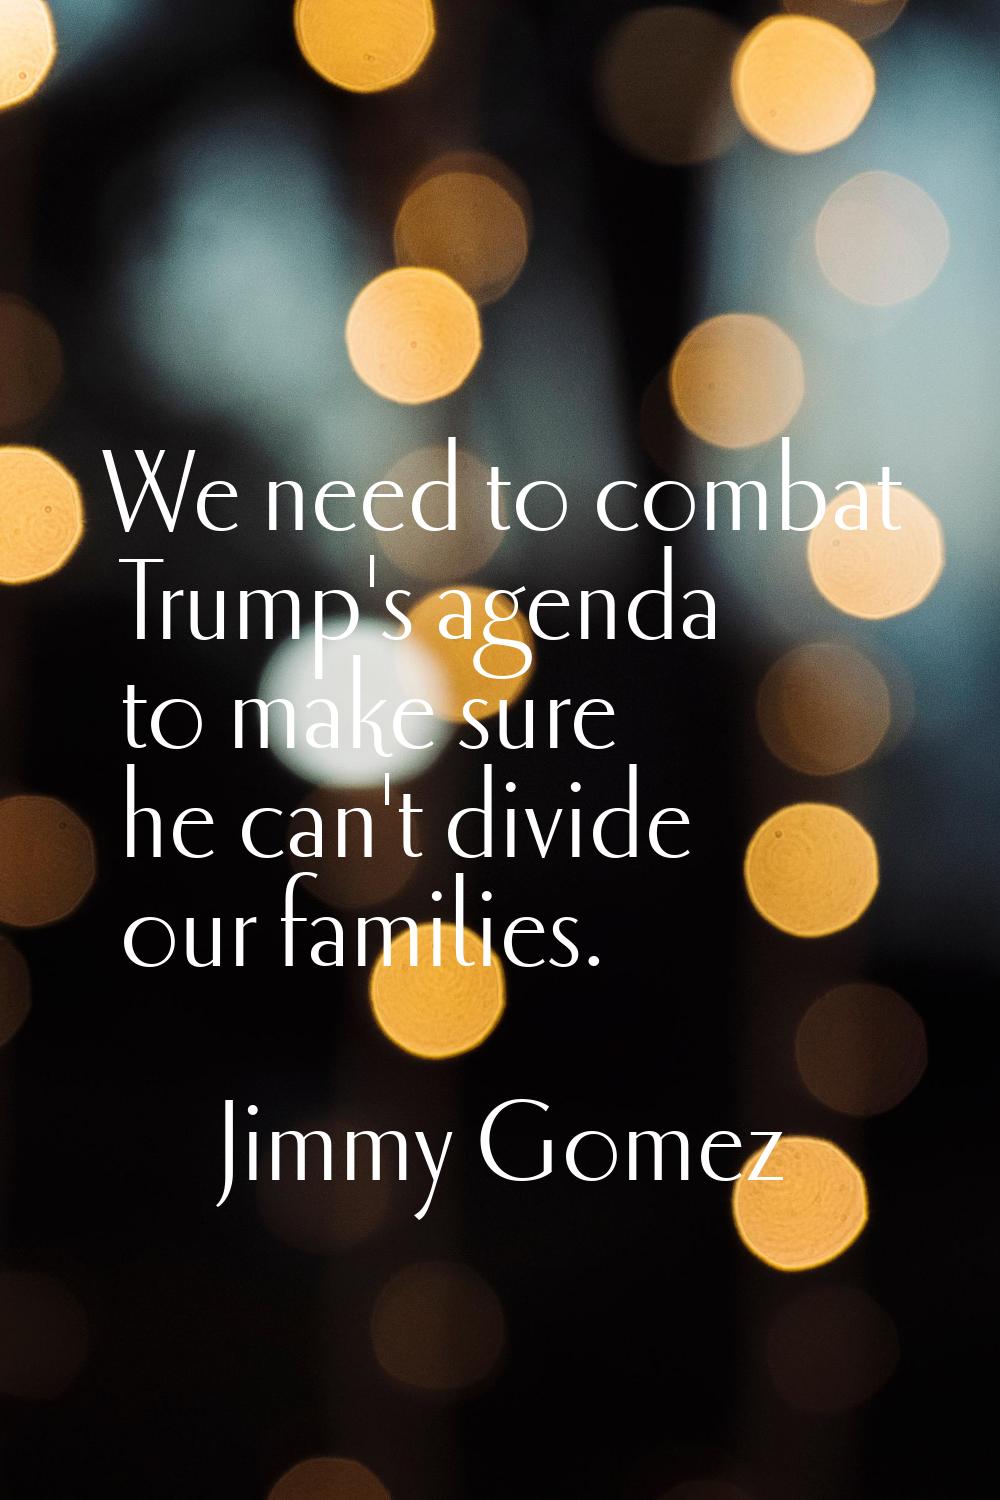 We need to combat Trump's agenda to make sure he can't divide our families.